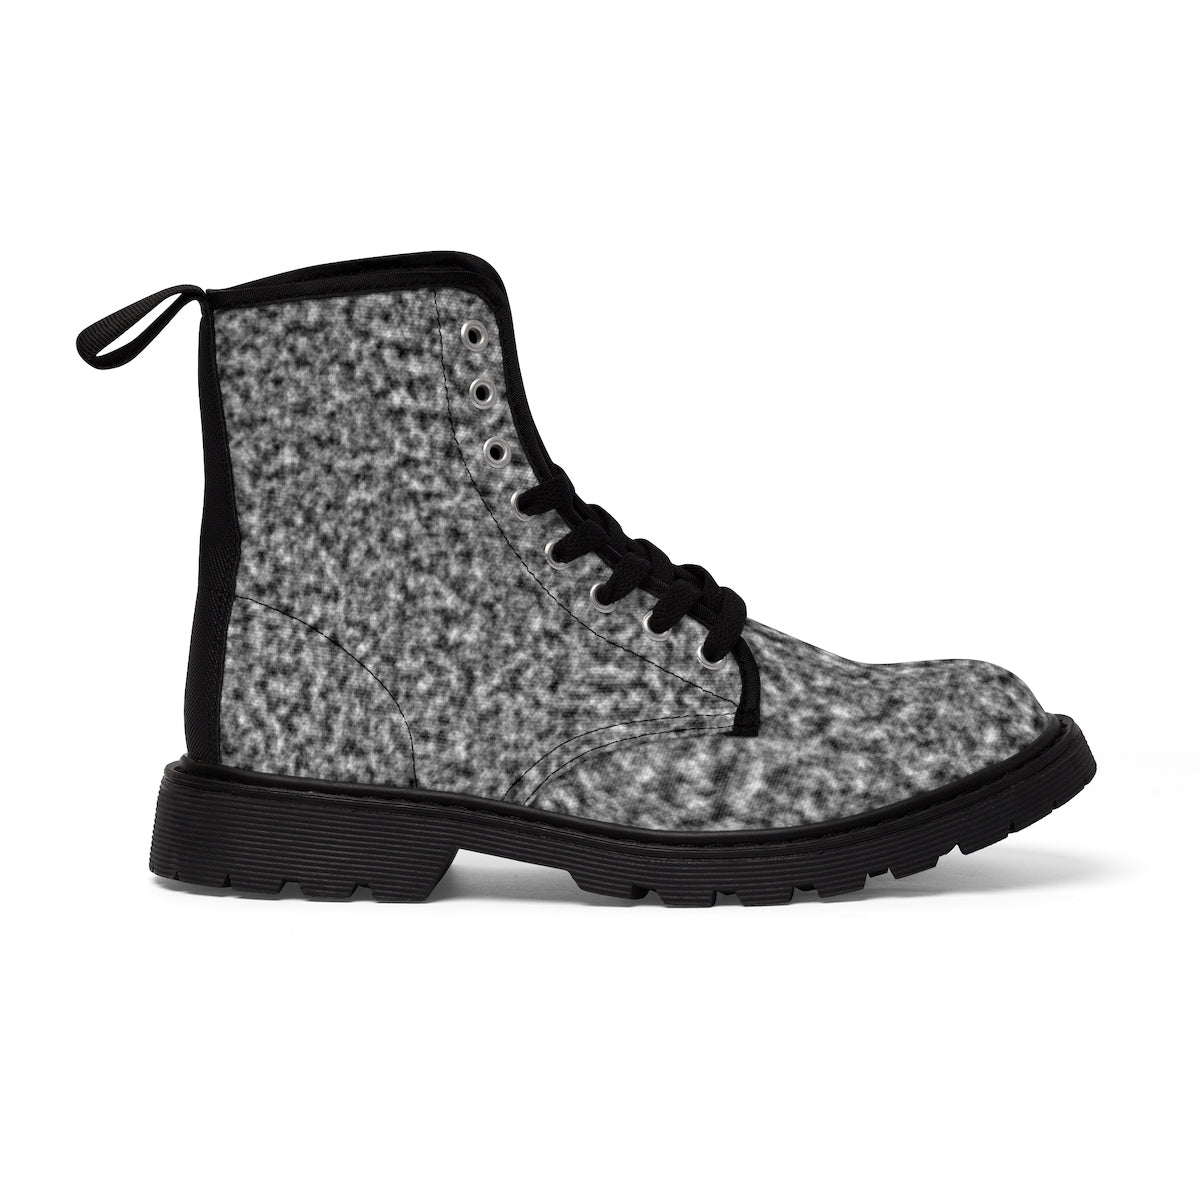 White and Black Clouds Boots